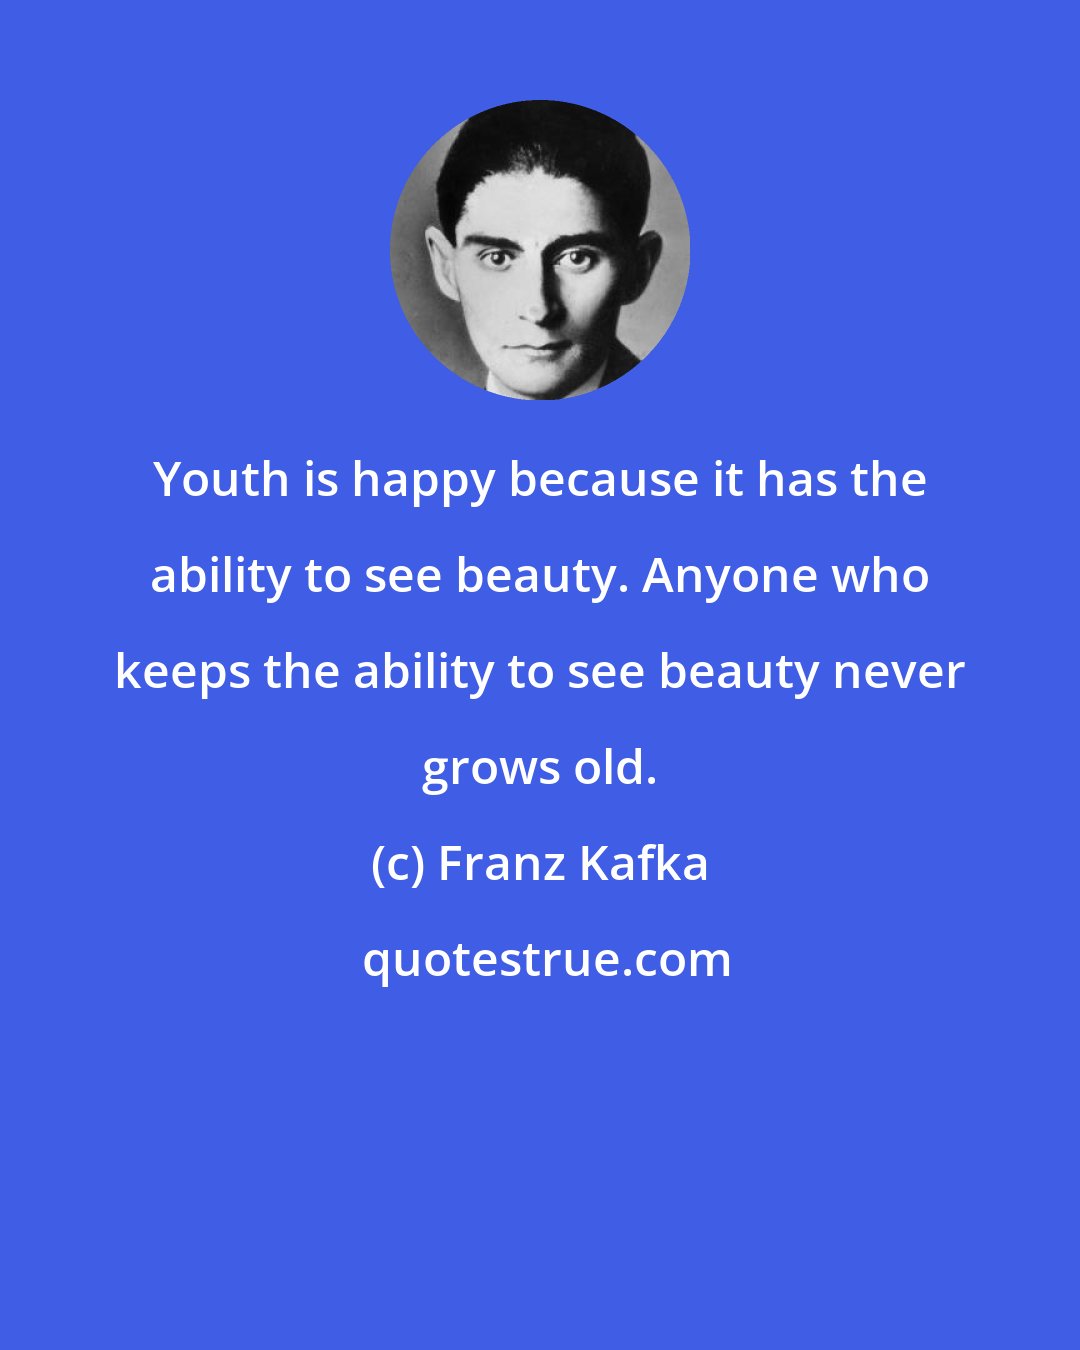 Franz Kafka: Youth is happy because it has the ability to see beauty. Anyone who keeps the ability to see beauty never grows old.